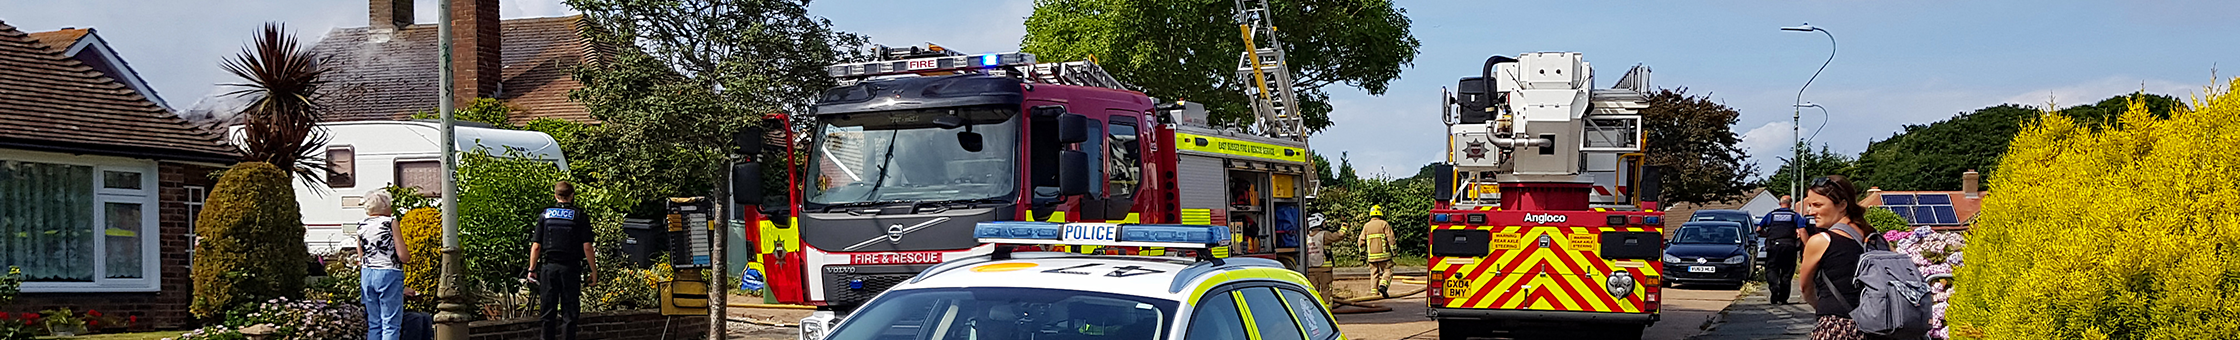 Police car and fire engines in a street of houses